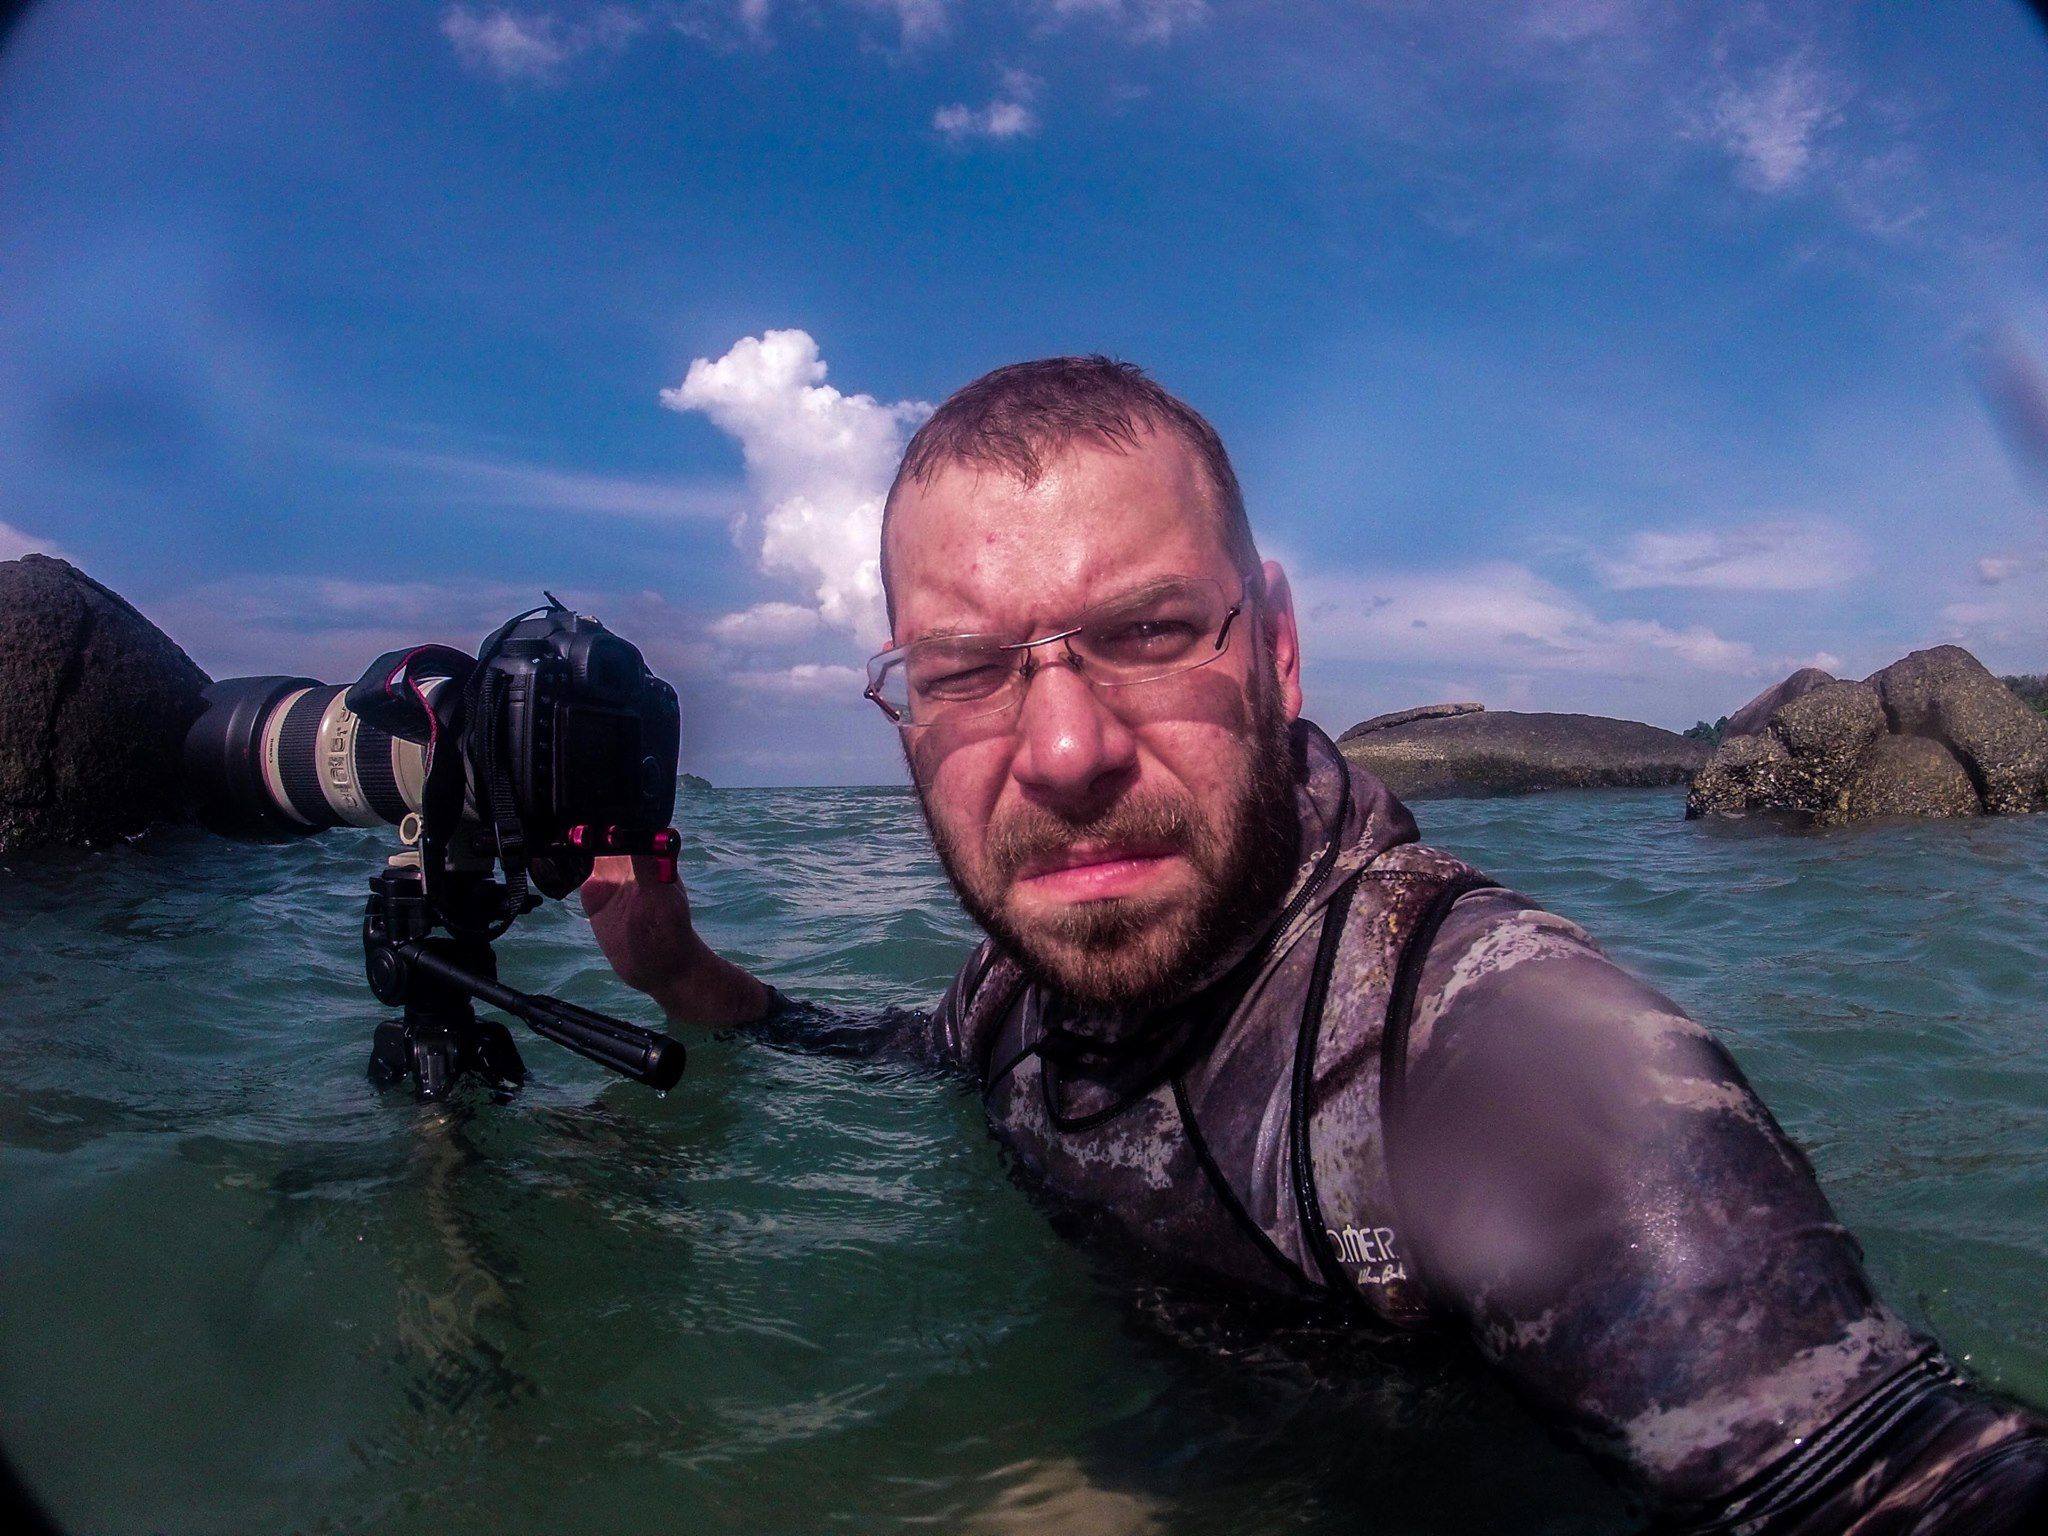 documentary wildlife photography filming on assignement in Andaman and Nicobar Islands - a selfie for testing second DSLR setup